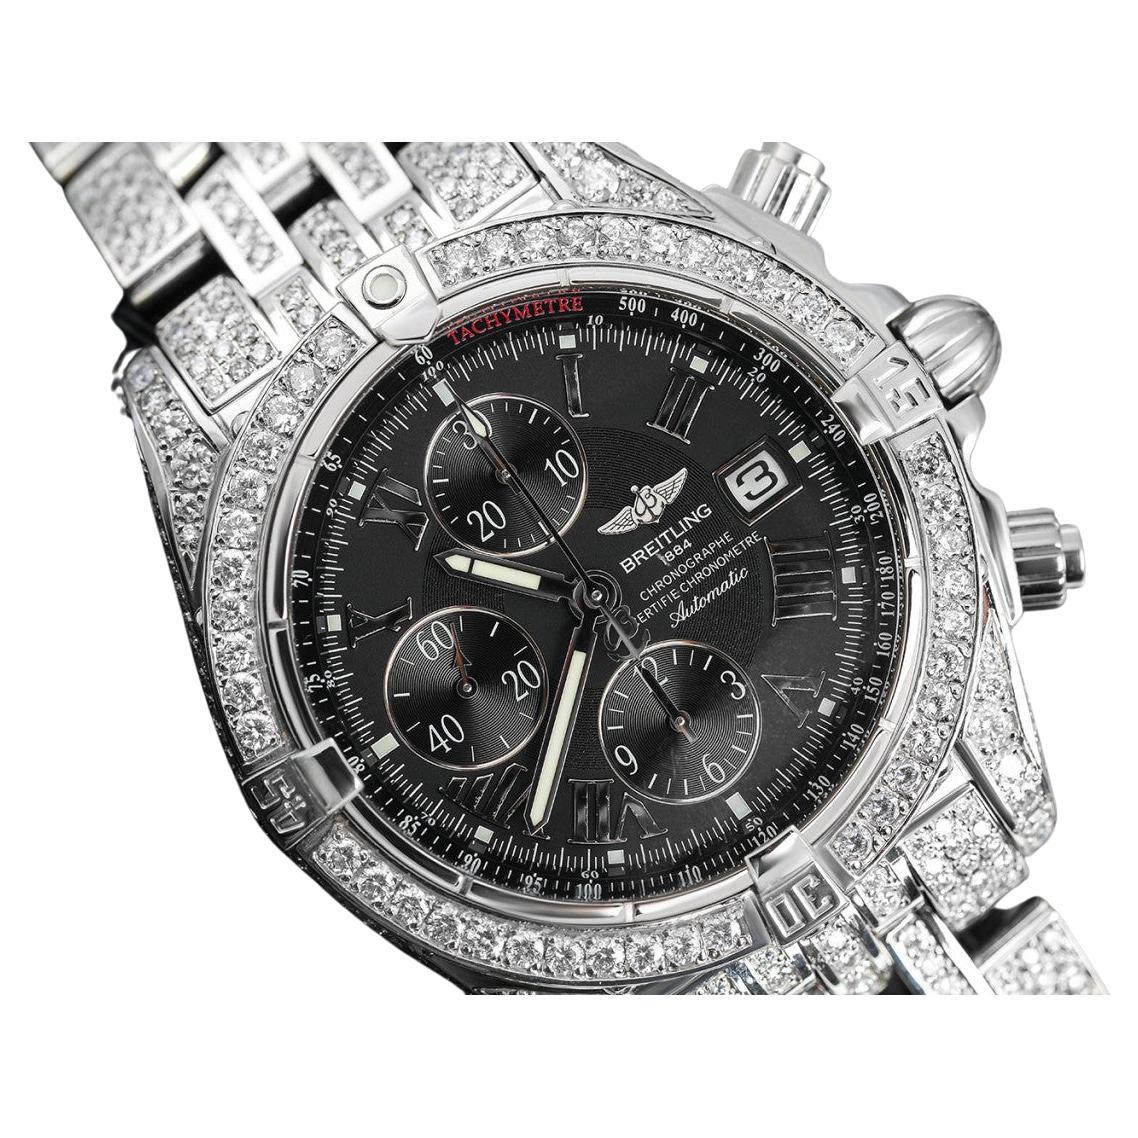 Are Breitling watches considered luxury?